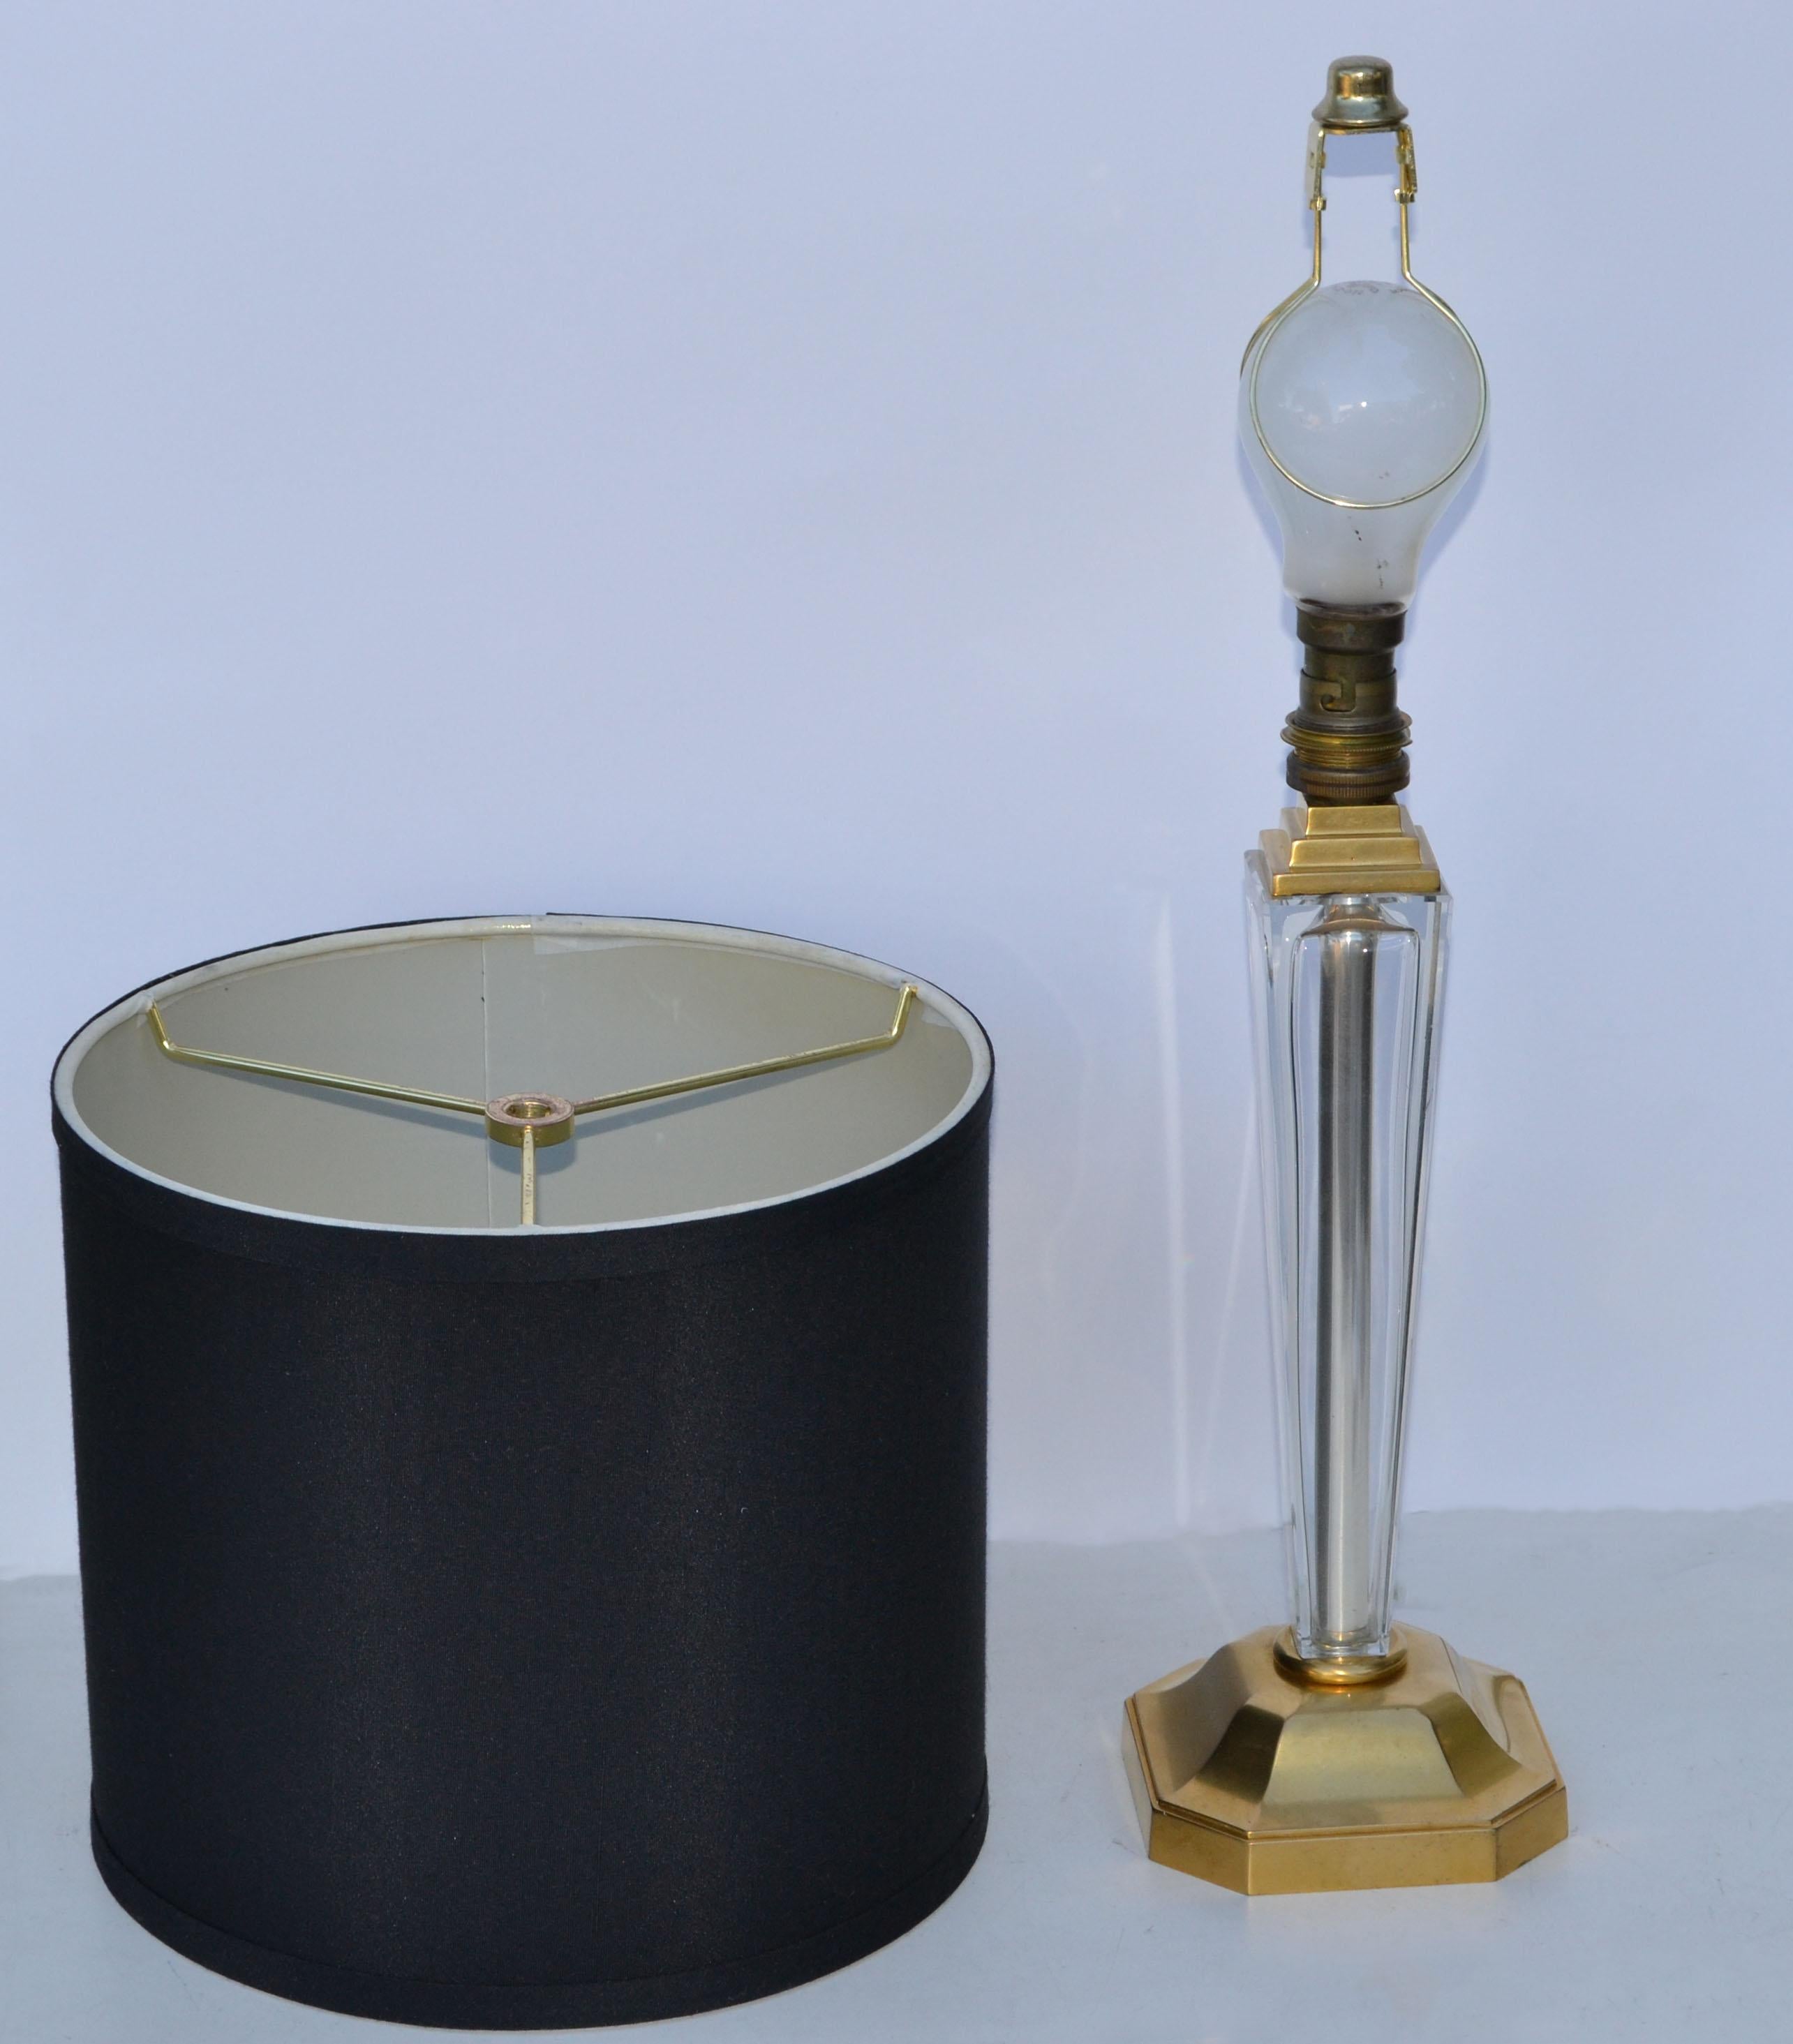 Maison Arlus Neoclassical Brass & Crystal Glass Table Lamp Black Drum Shade In Good Condition For Sale In Miami, FL